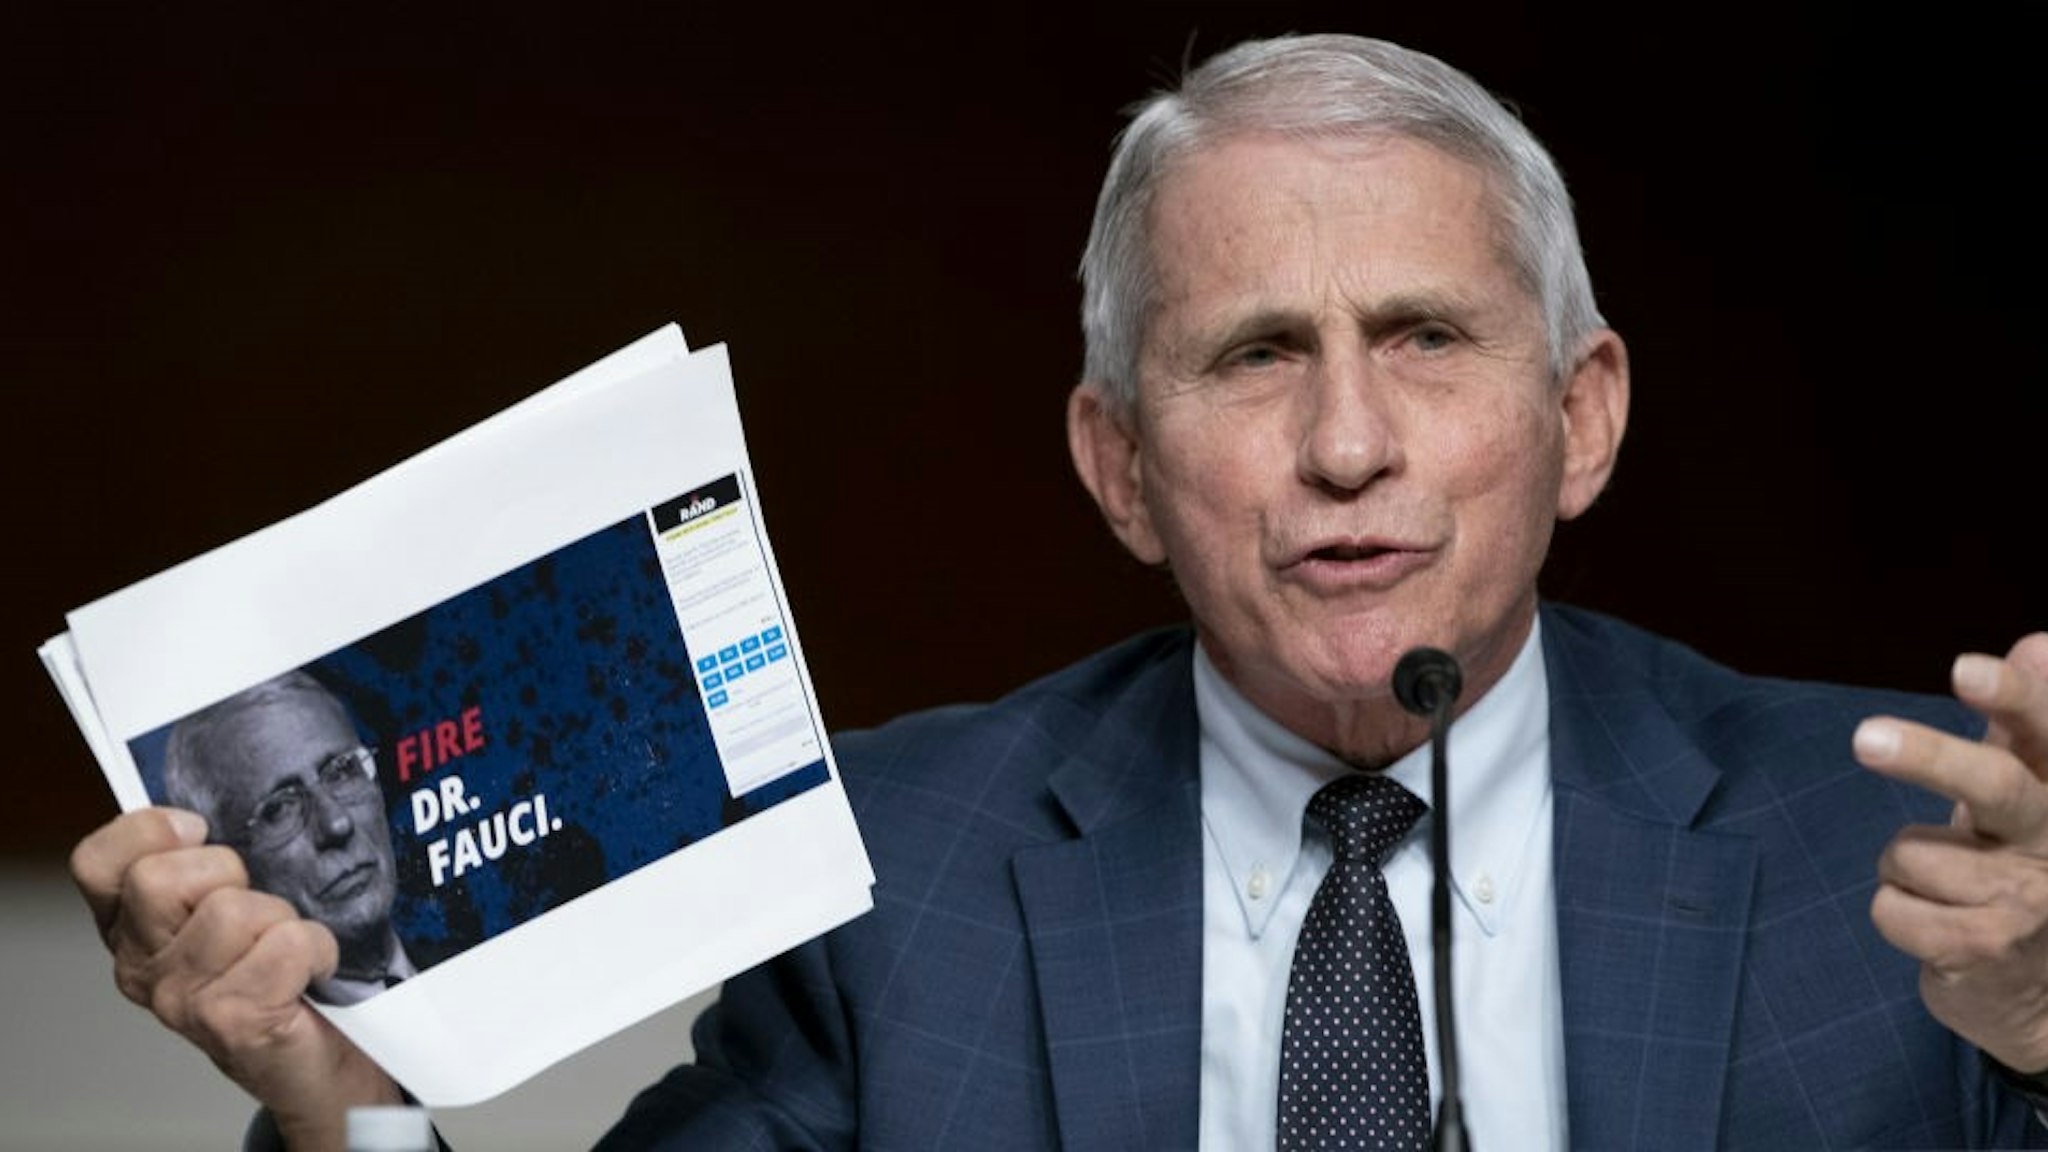 Anthony Fauci, director of the National Institute of Allergy and Infectious Diseases, speaks during a Senate Health, Education, Labor, and Pensions Committee hearing in Washington, D.C., U.S., on Tuesday, Jan. 11, 2022. The hearing is titled "Addressing New Variants: A Federal Perspective on the COVID-19 Response."